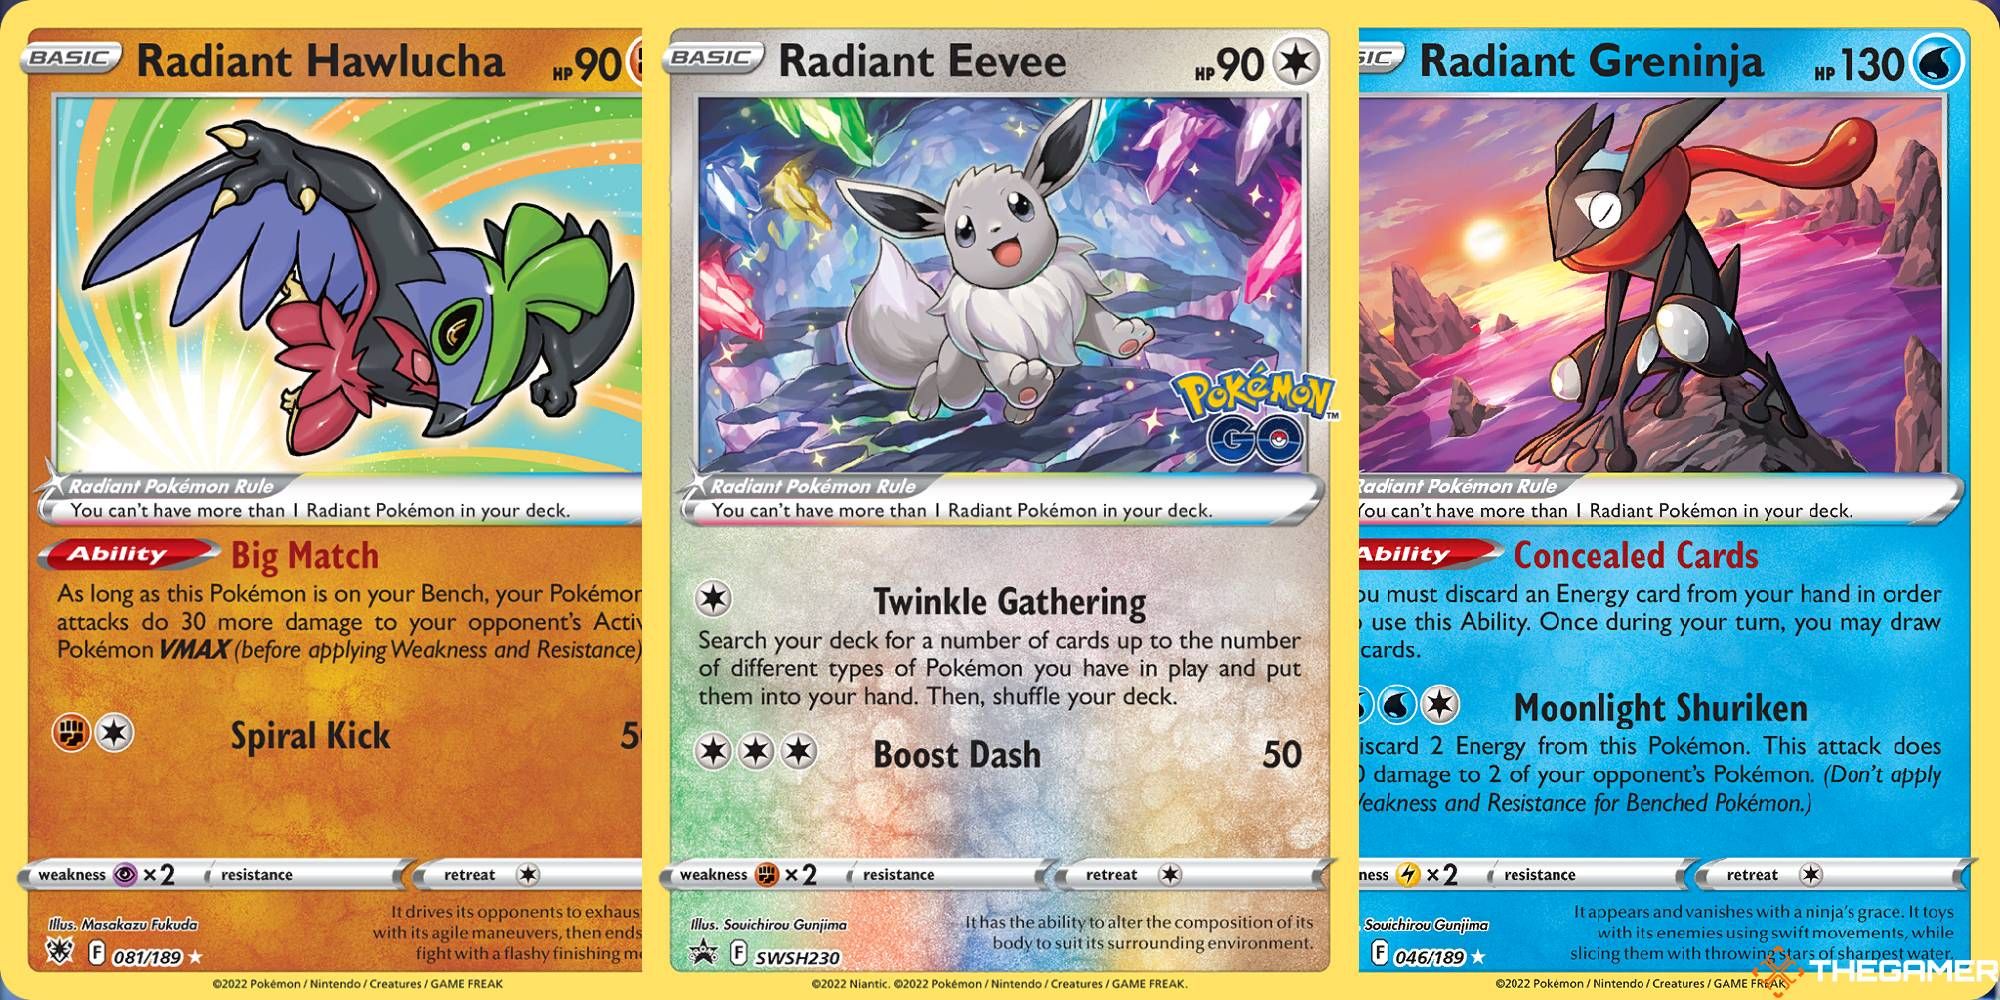 What Are Radiant Cards In The Pokemon TCG?